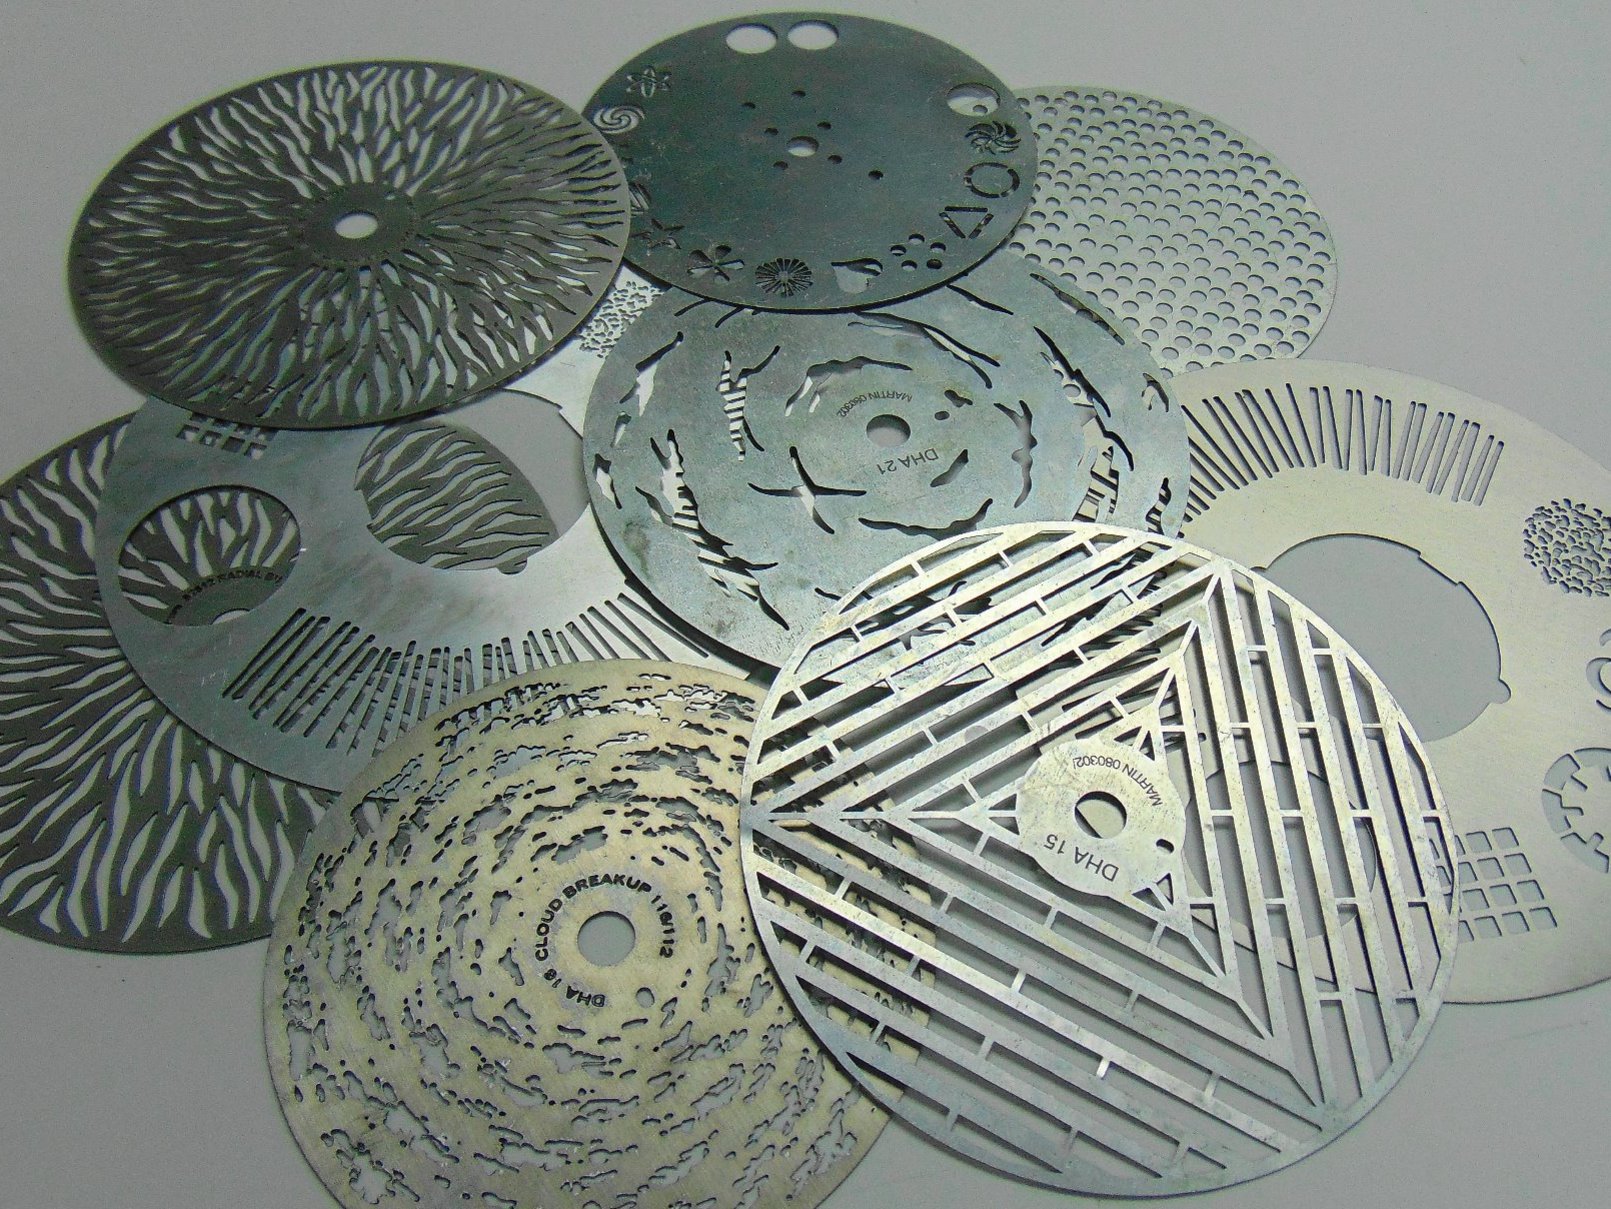 Chemically etched aluminum by Etch tech taking advantage of using the right chemistry to etch Aluminum.